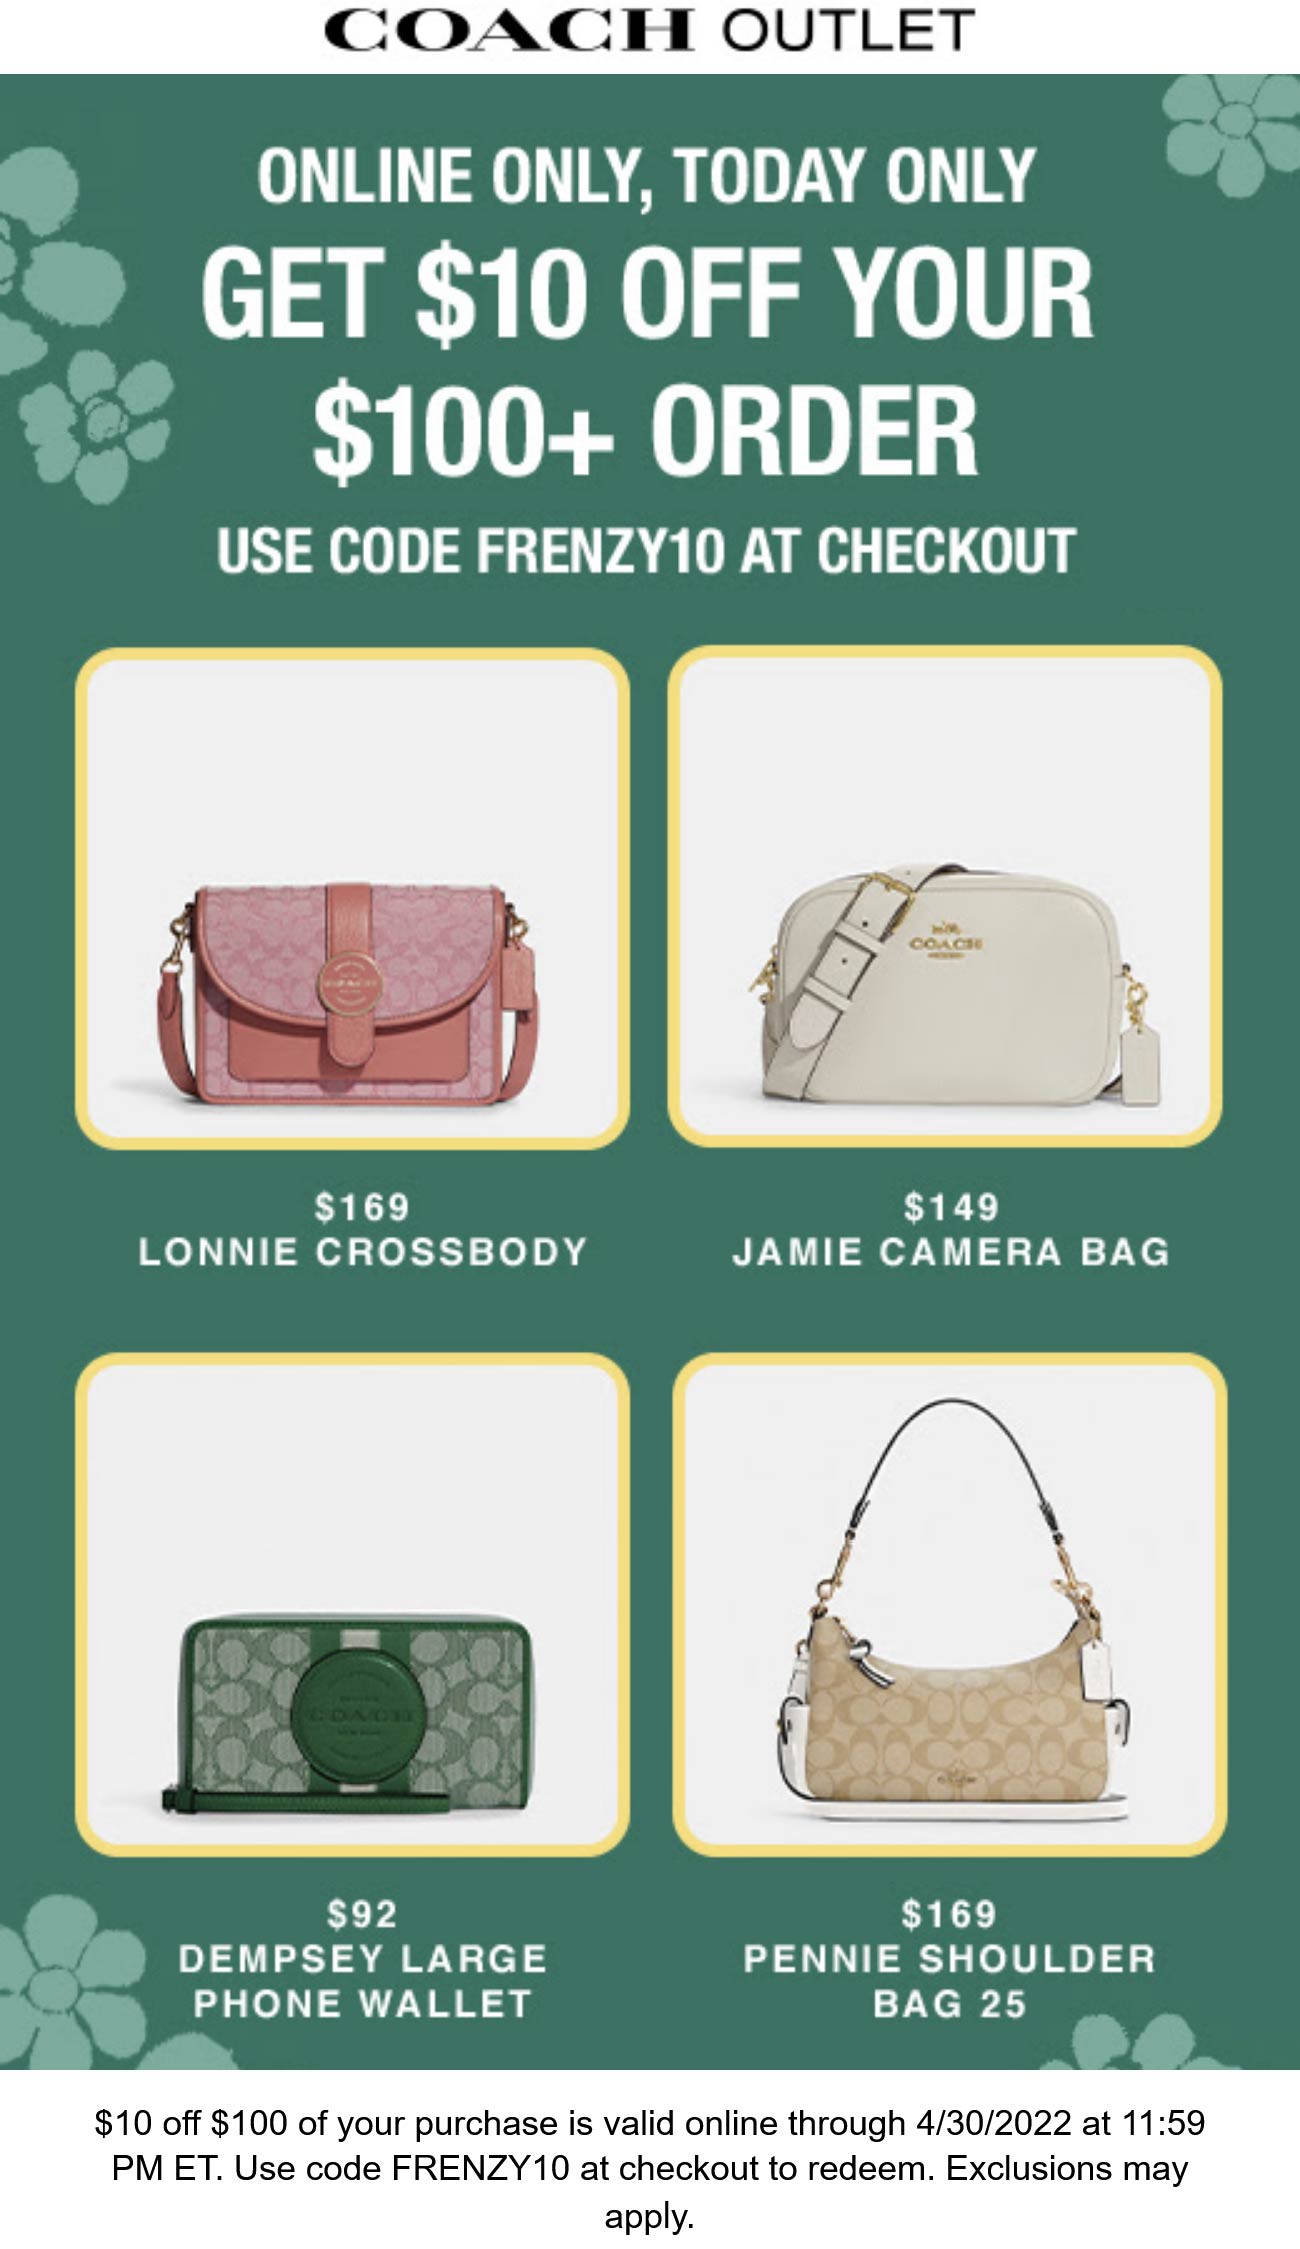 Coach Outlet stores Coupon  $10 off $100 today online at Coach Outlet via promo code FRENZY10 #coachoutlet 